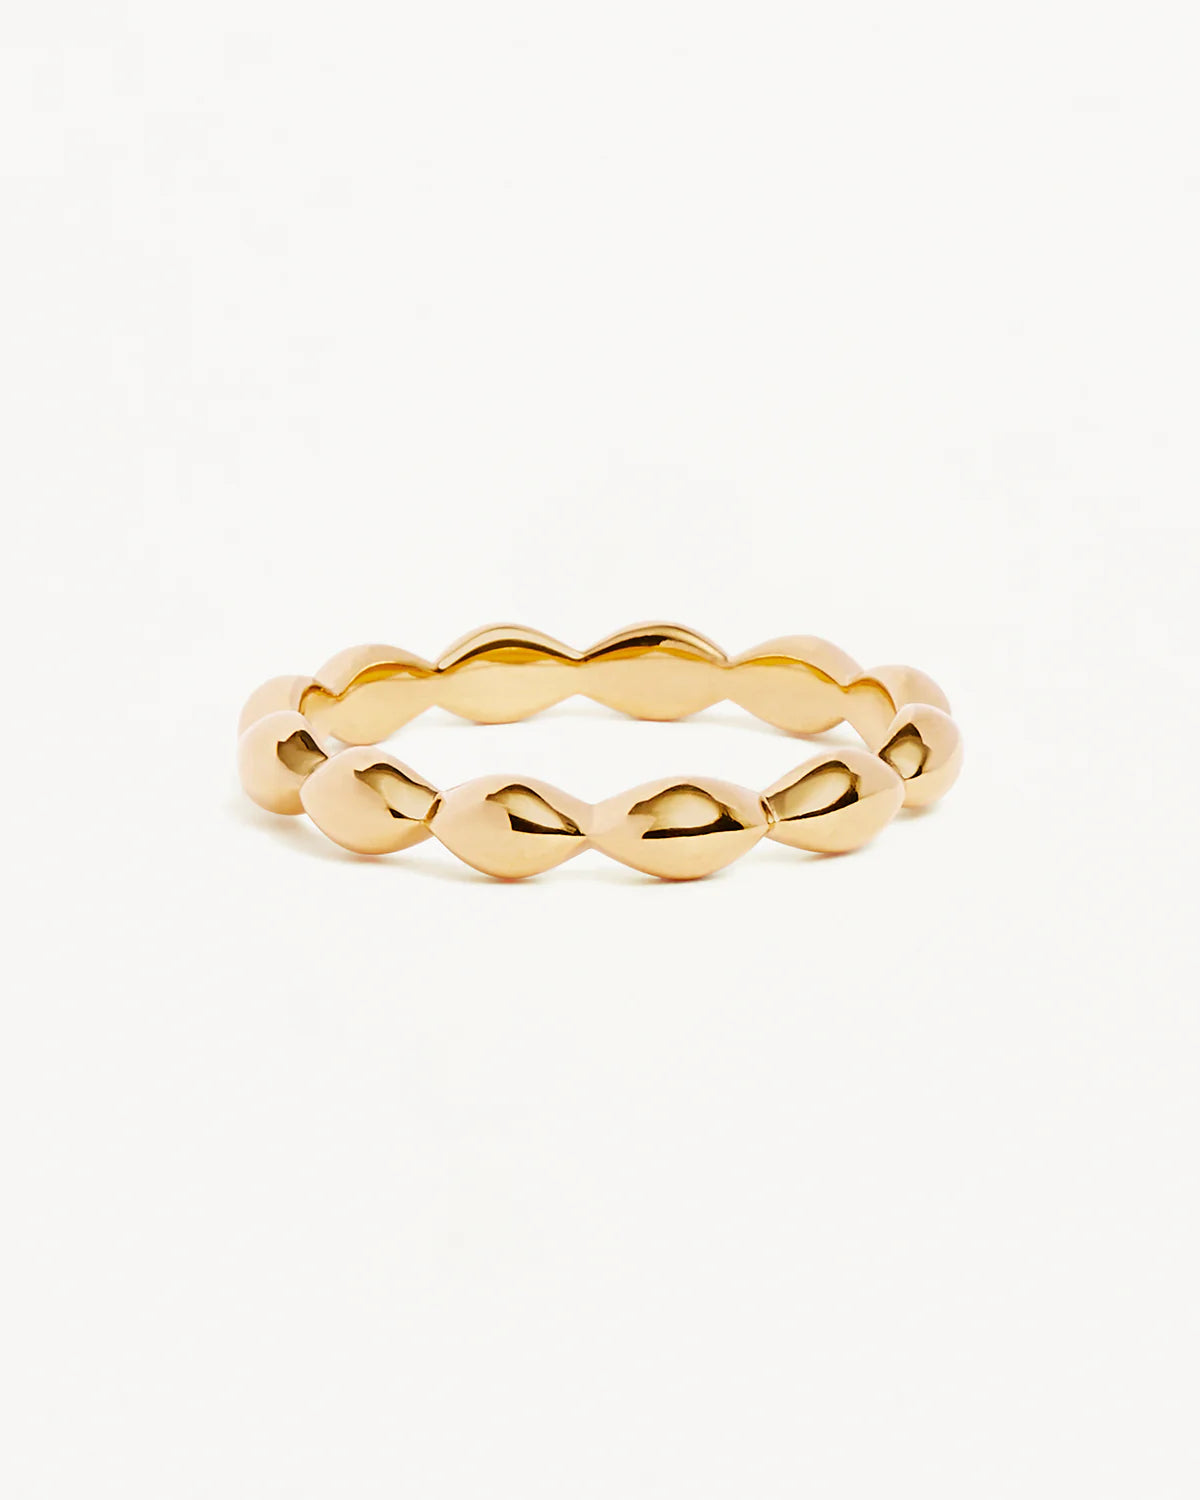 PROTECTED PATH RING - 18KT VERMEIL GOLD